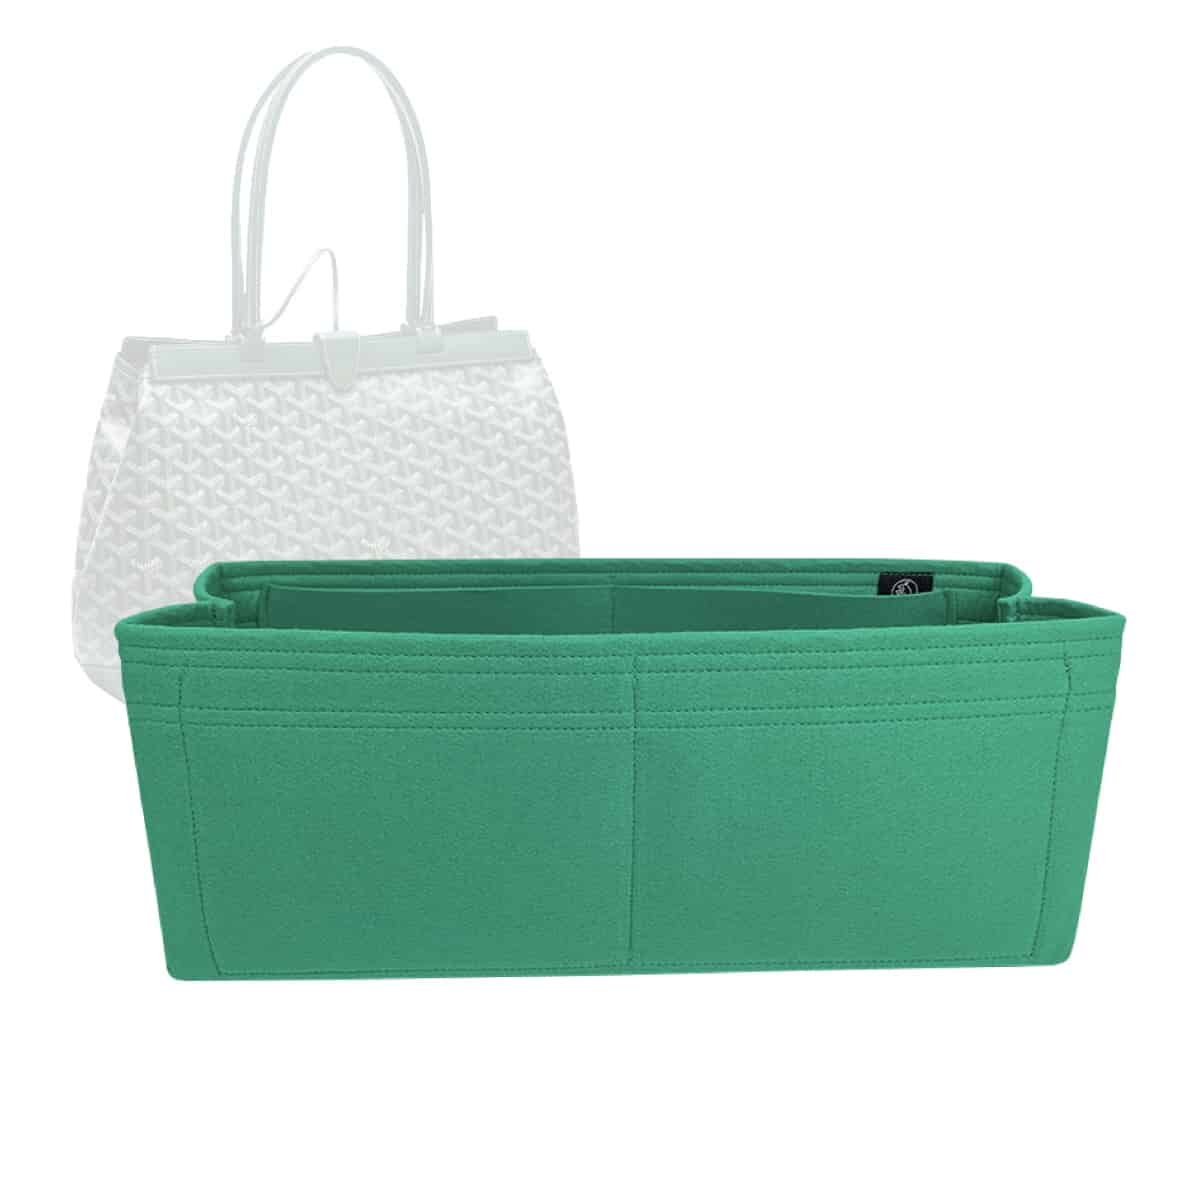 5-9/ Go-Bellechasse-PM-DS) Bag Organizer for Bellechasse PM - SAMORGA®  Perfect Bag Organizer